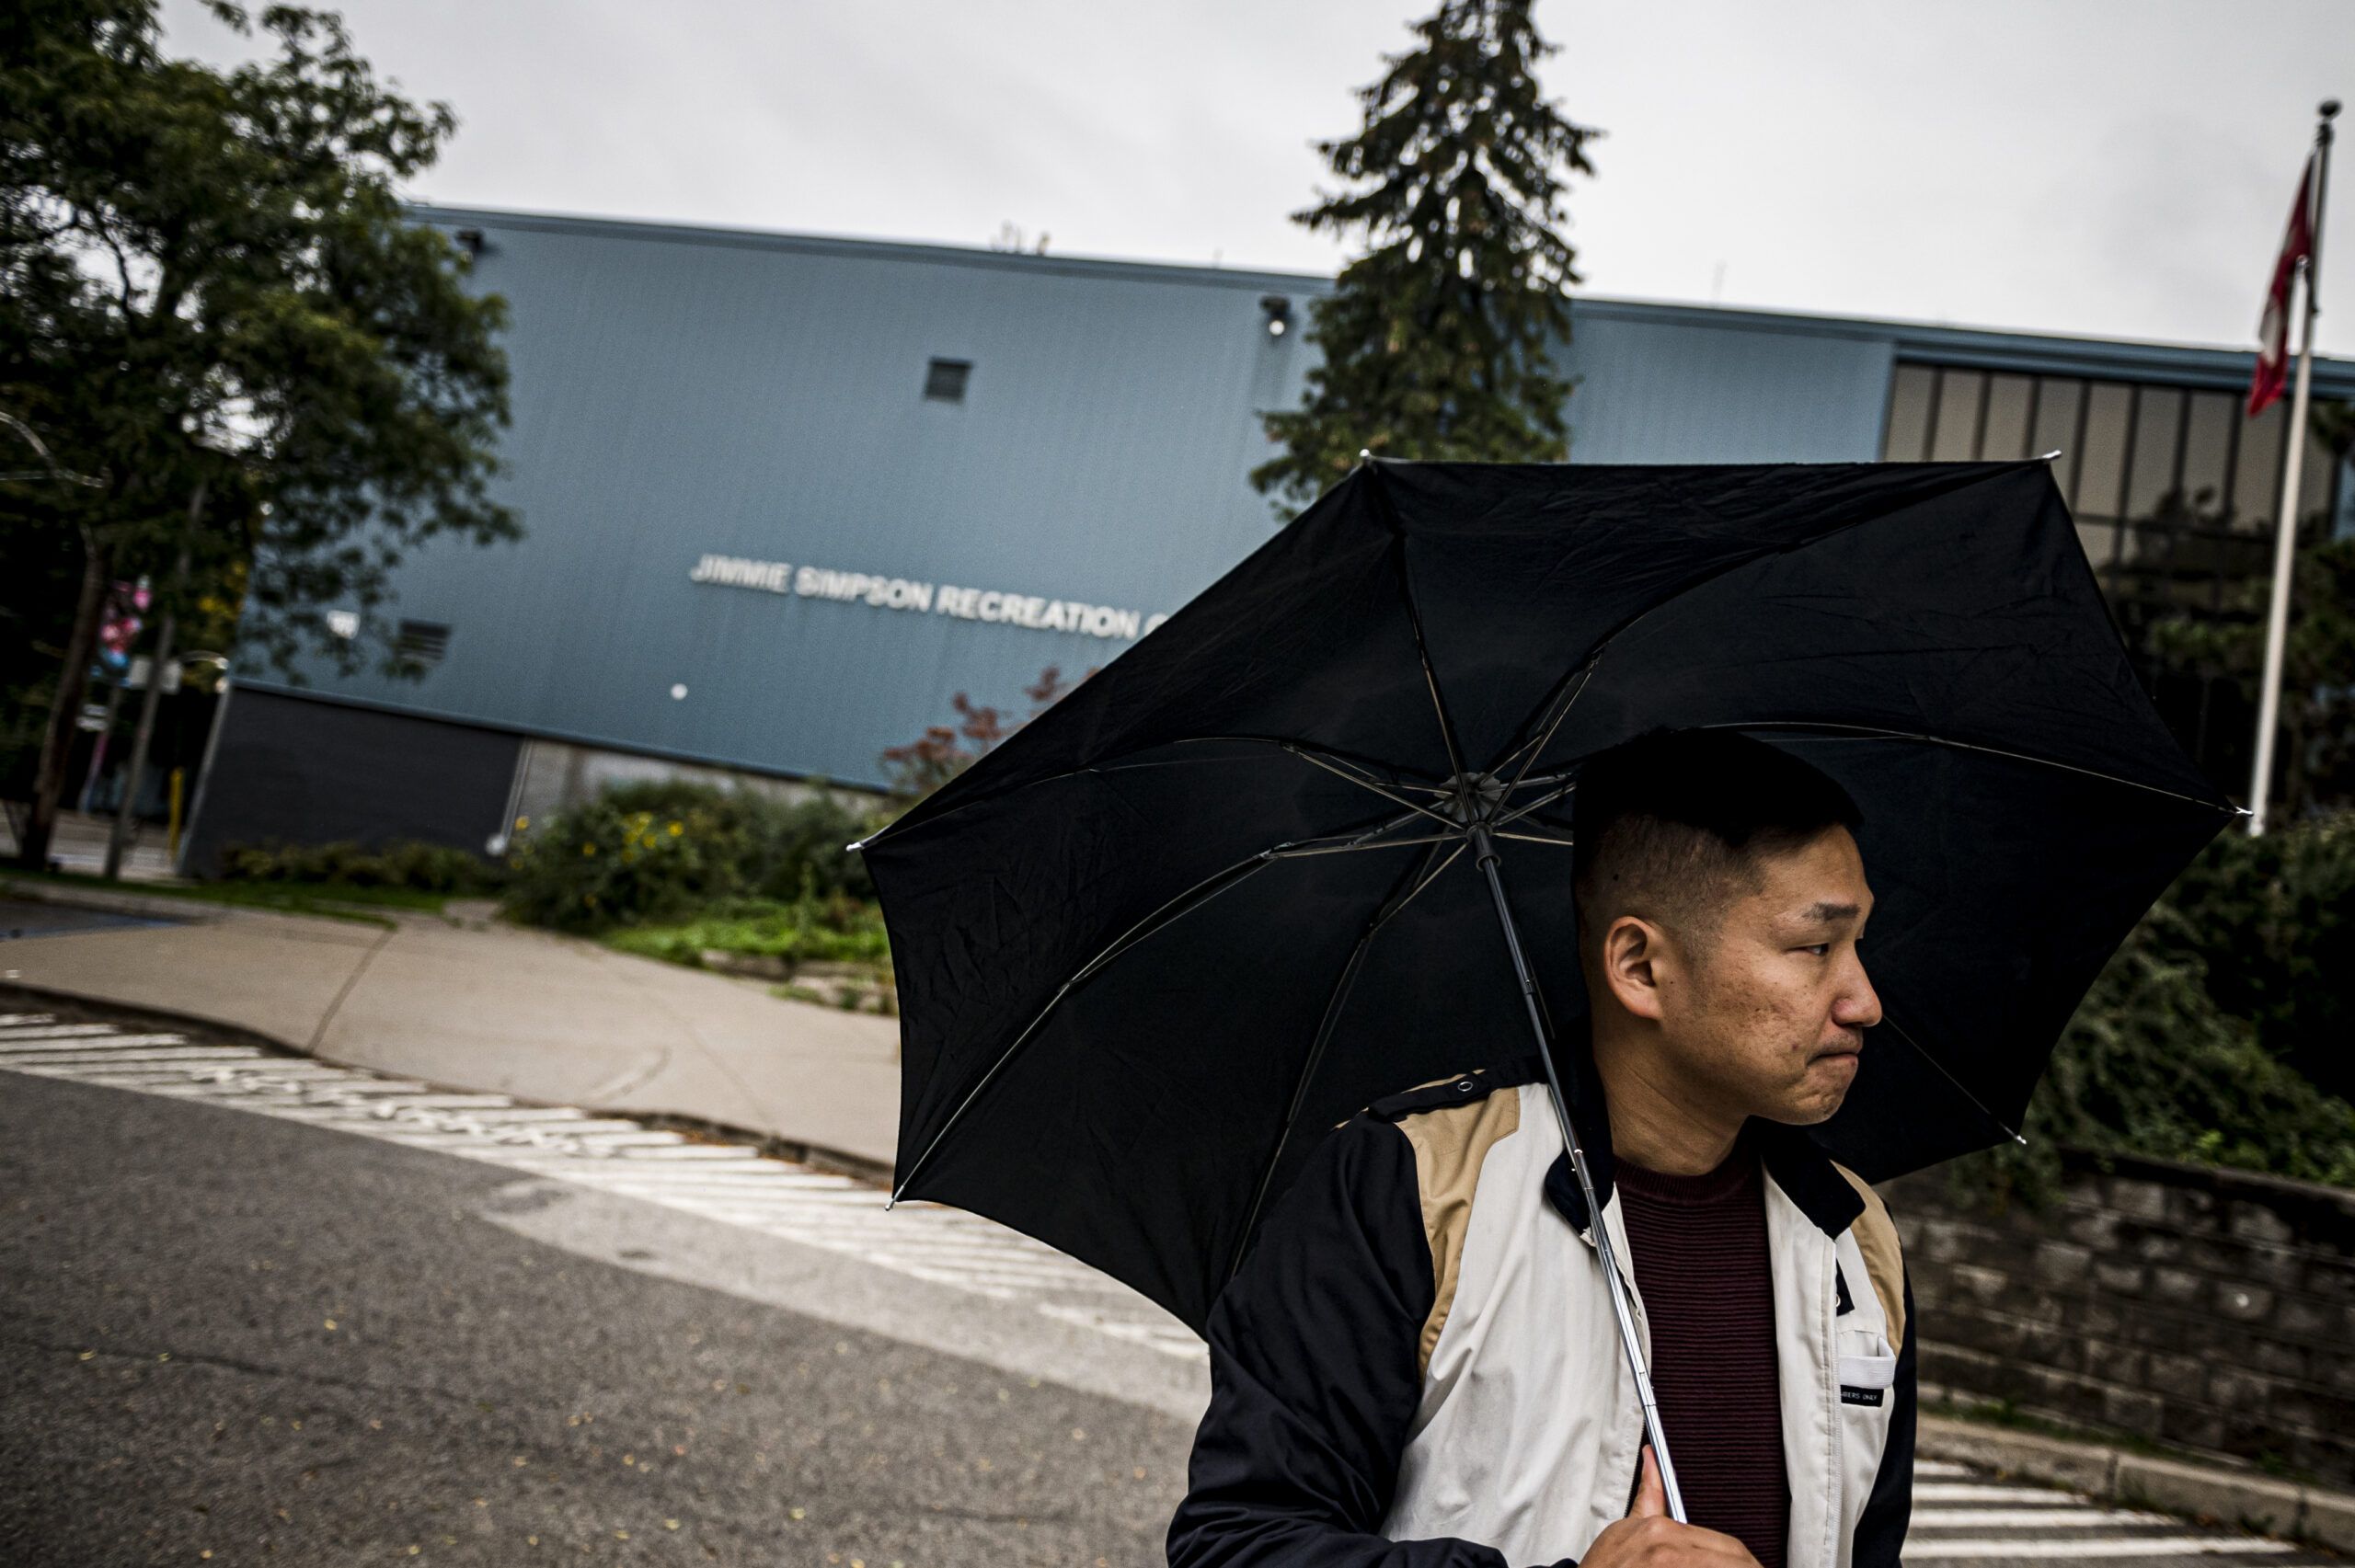 Eon Song walks past the Jimmie Simpson Recreation Centre holding an umbrella